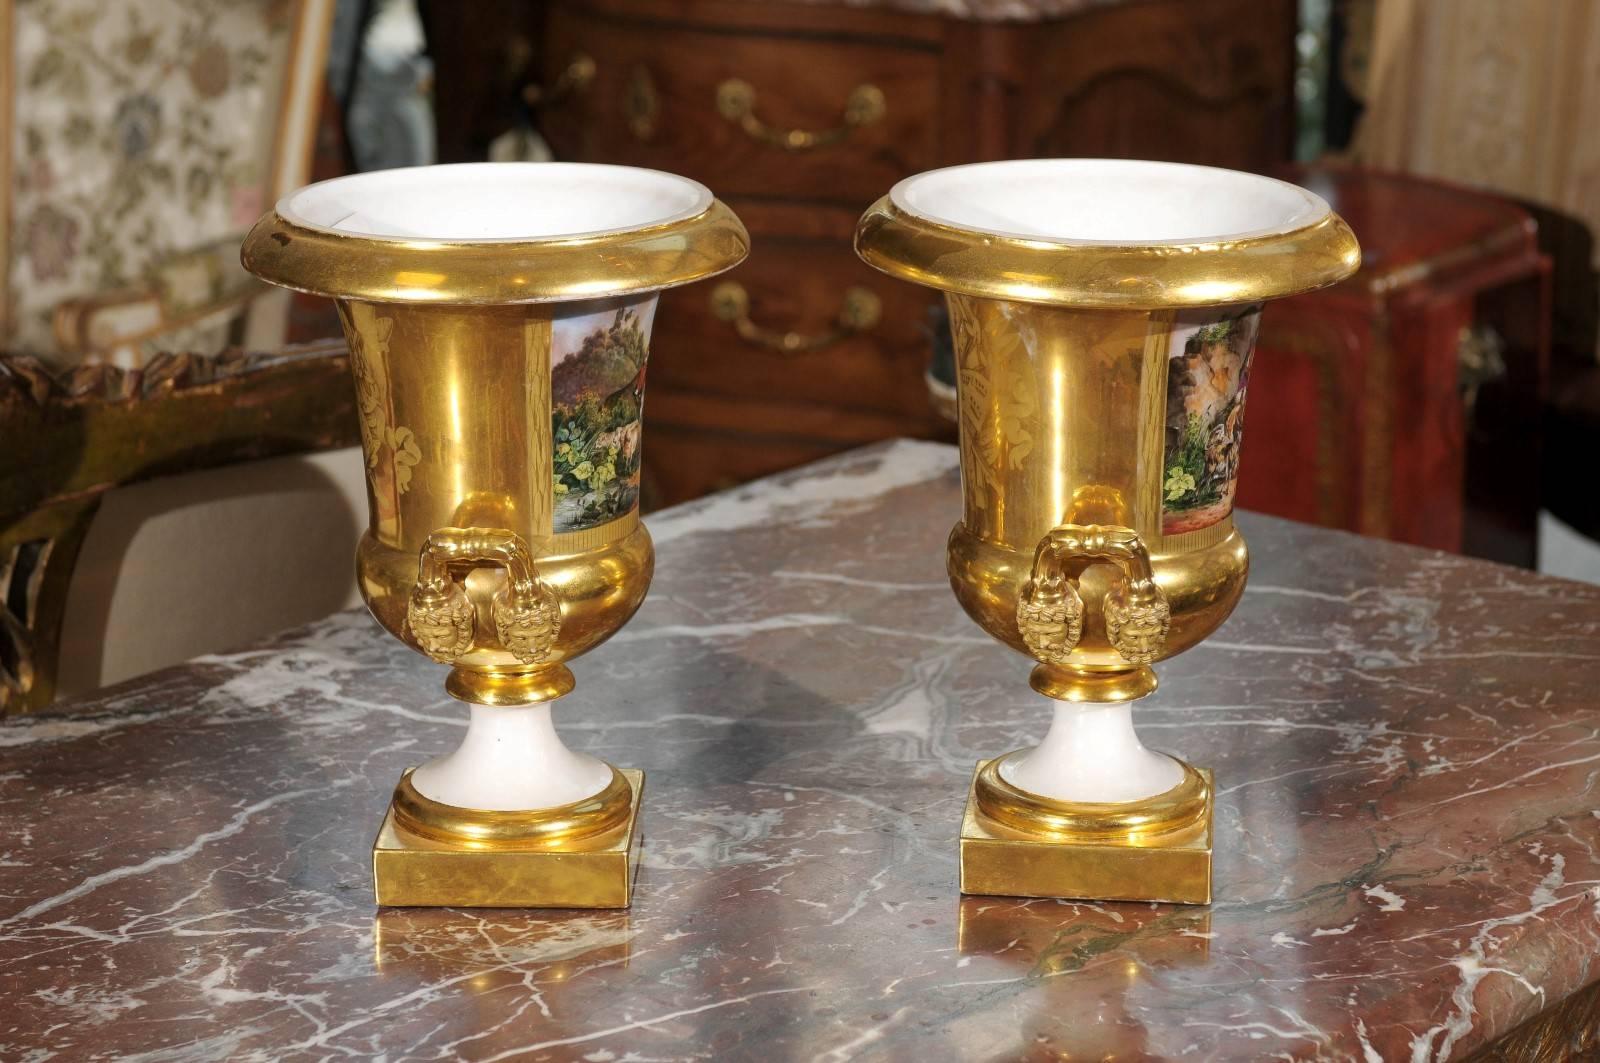 Pair of 19th Century French Paris Porcelain Urns with Painted Scenes & Handles For Sale 4